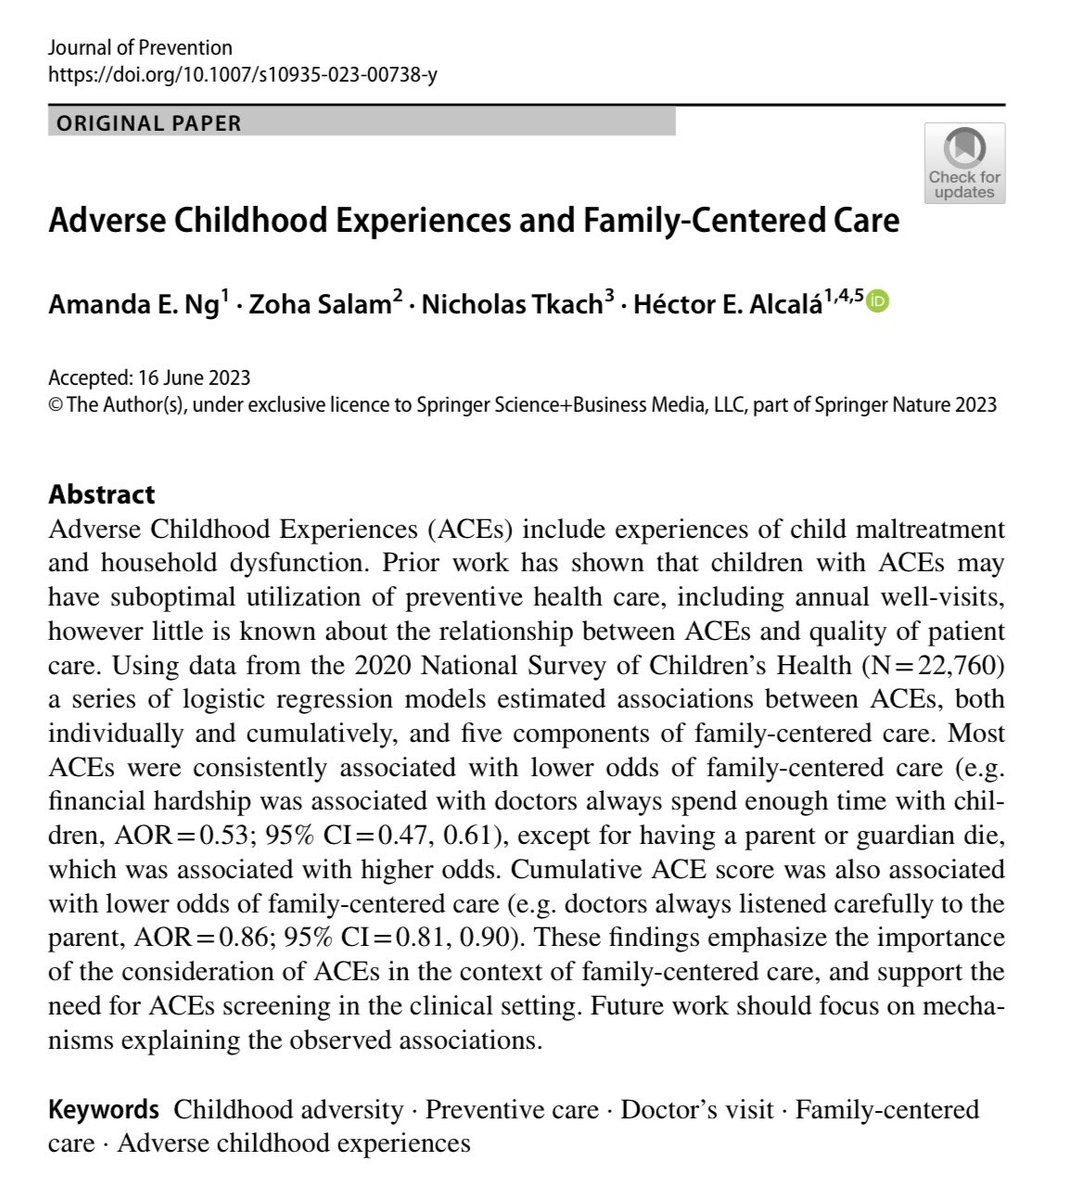 ✨New work✨examining associations between ACEs and Family-Centered Care using the 2020 NSCH!

thanks to @Hector_E_Alcala for leading us, as always!

Read more here: trebuchet.public.springernature.app/get_content/05…

#childhealth #epitwitter #heathcare